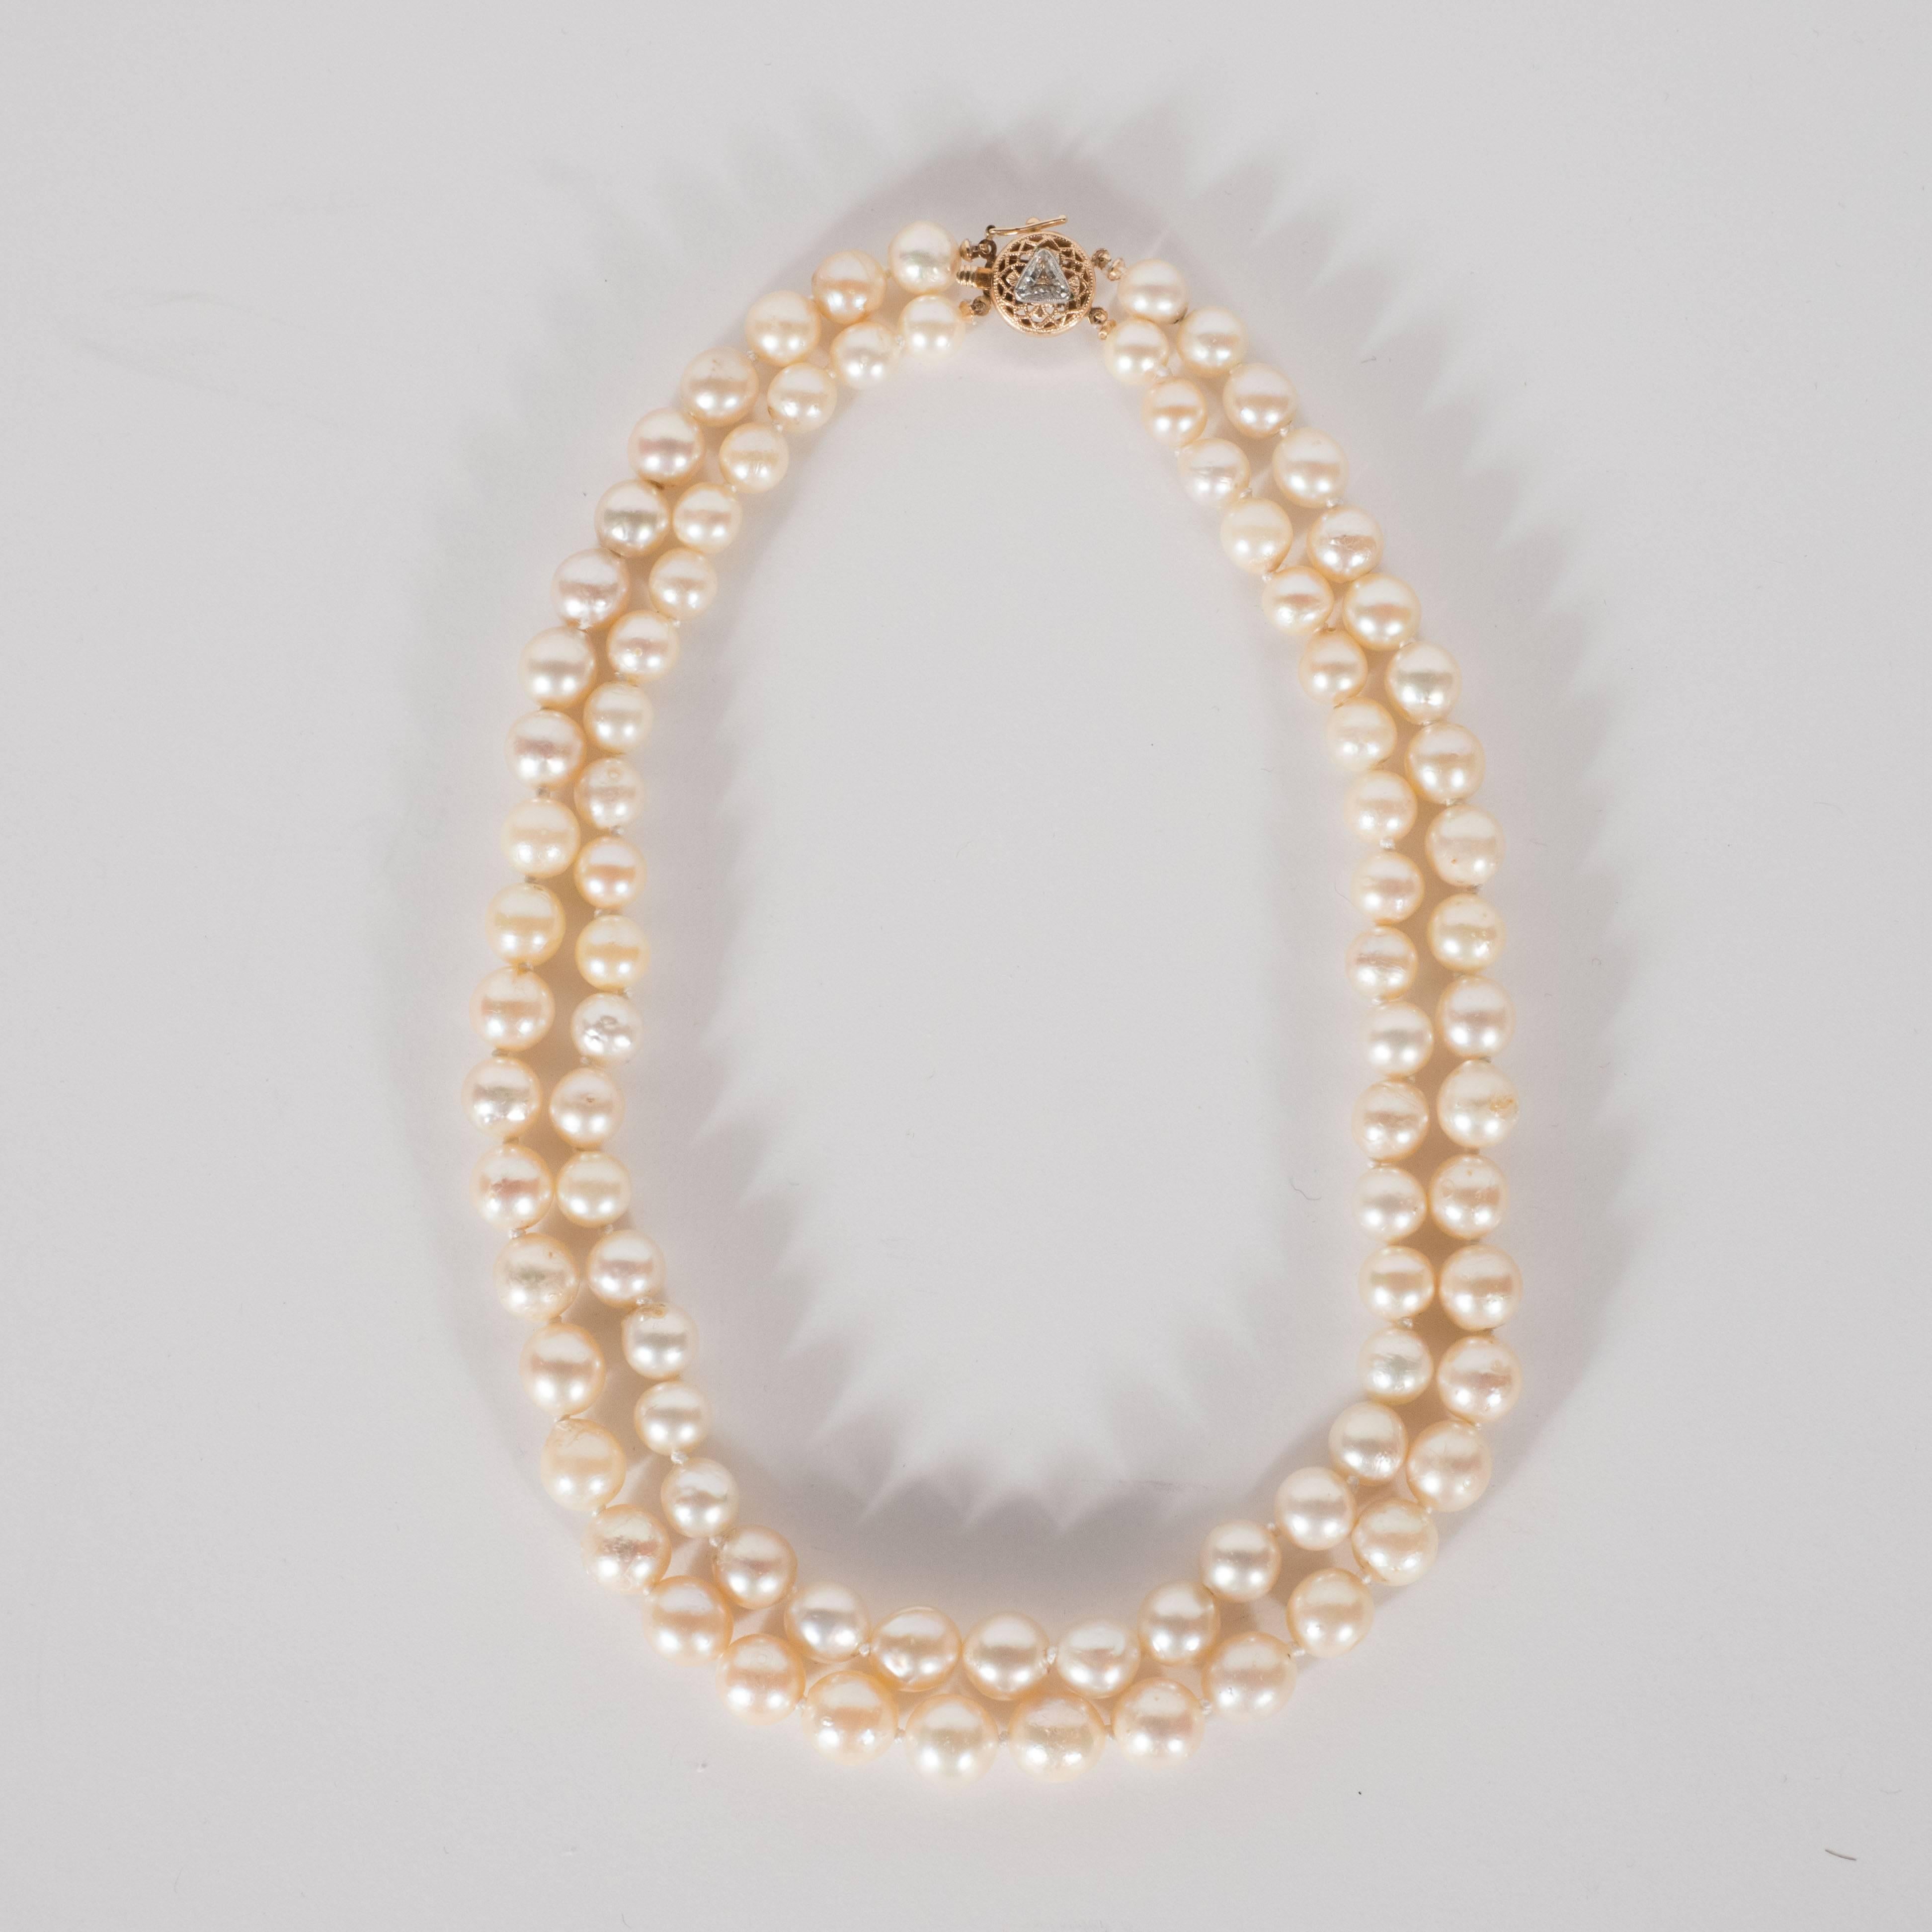 This elegant Baroque graduated double strand pearl choker necklace was realized in the United States, circa 1950. It features an exquisite circular gold filigree clasp with a trillion cut diamond in its center. With its classical and timeless form,